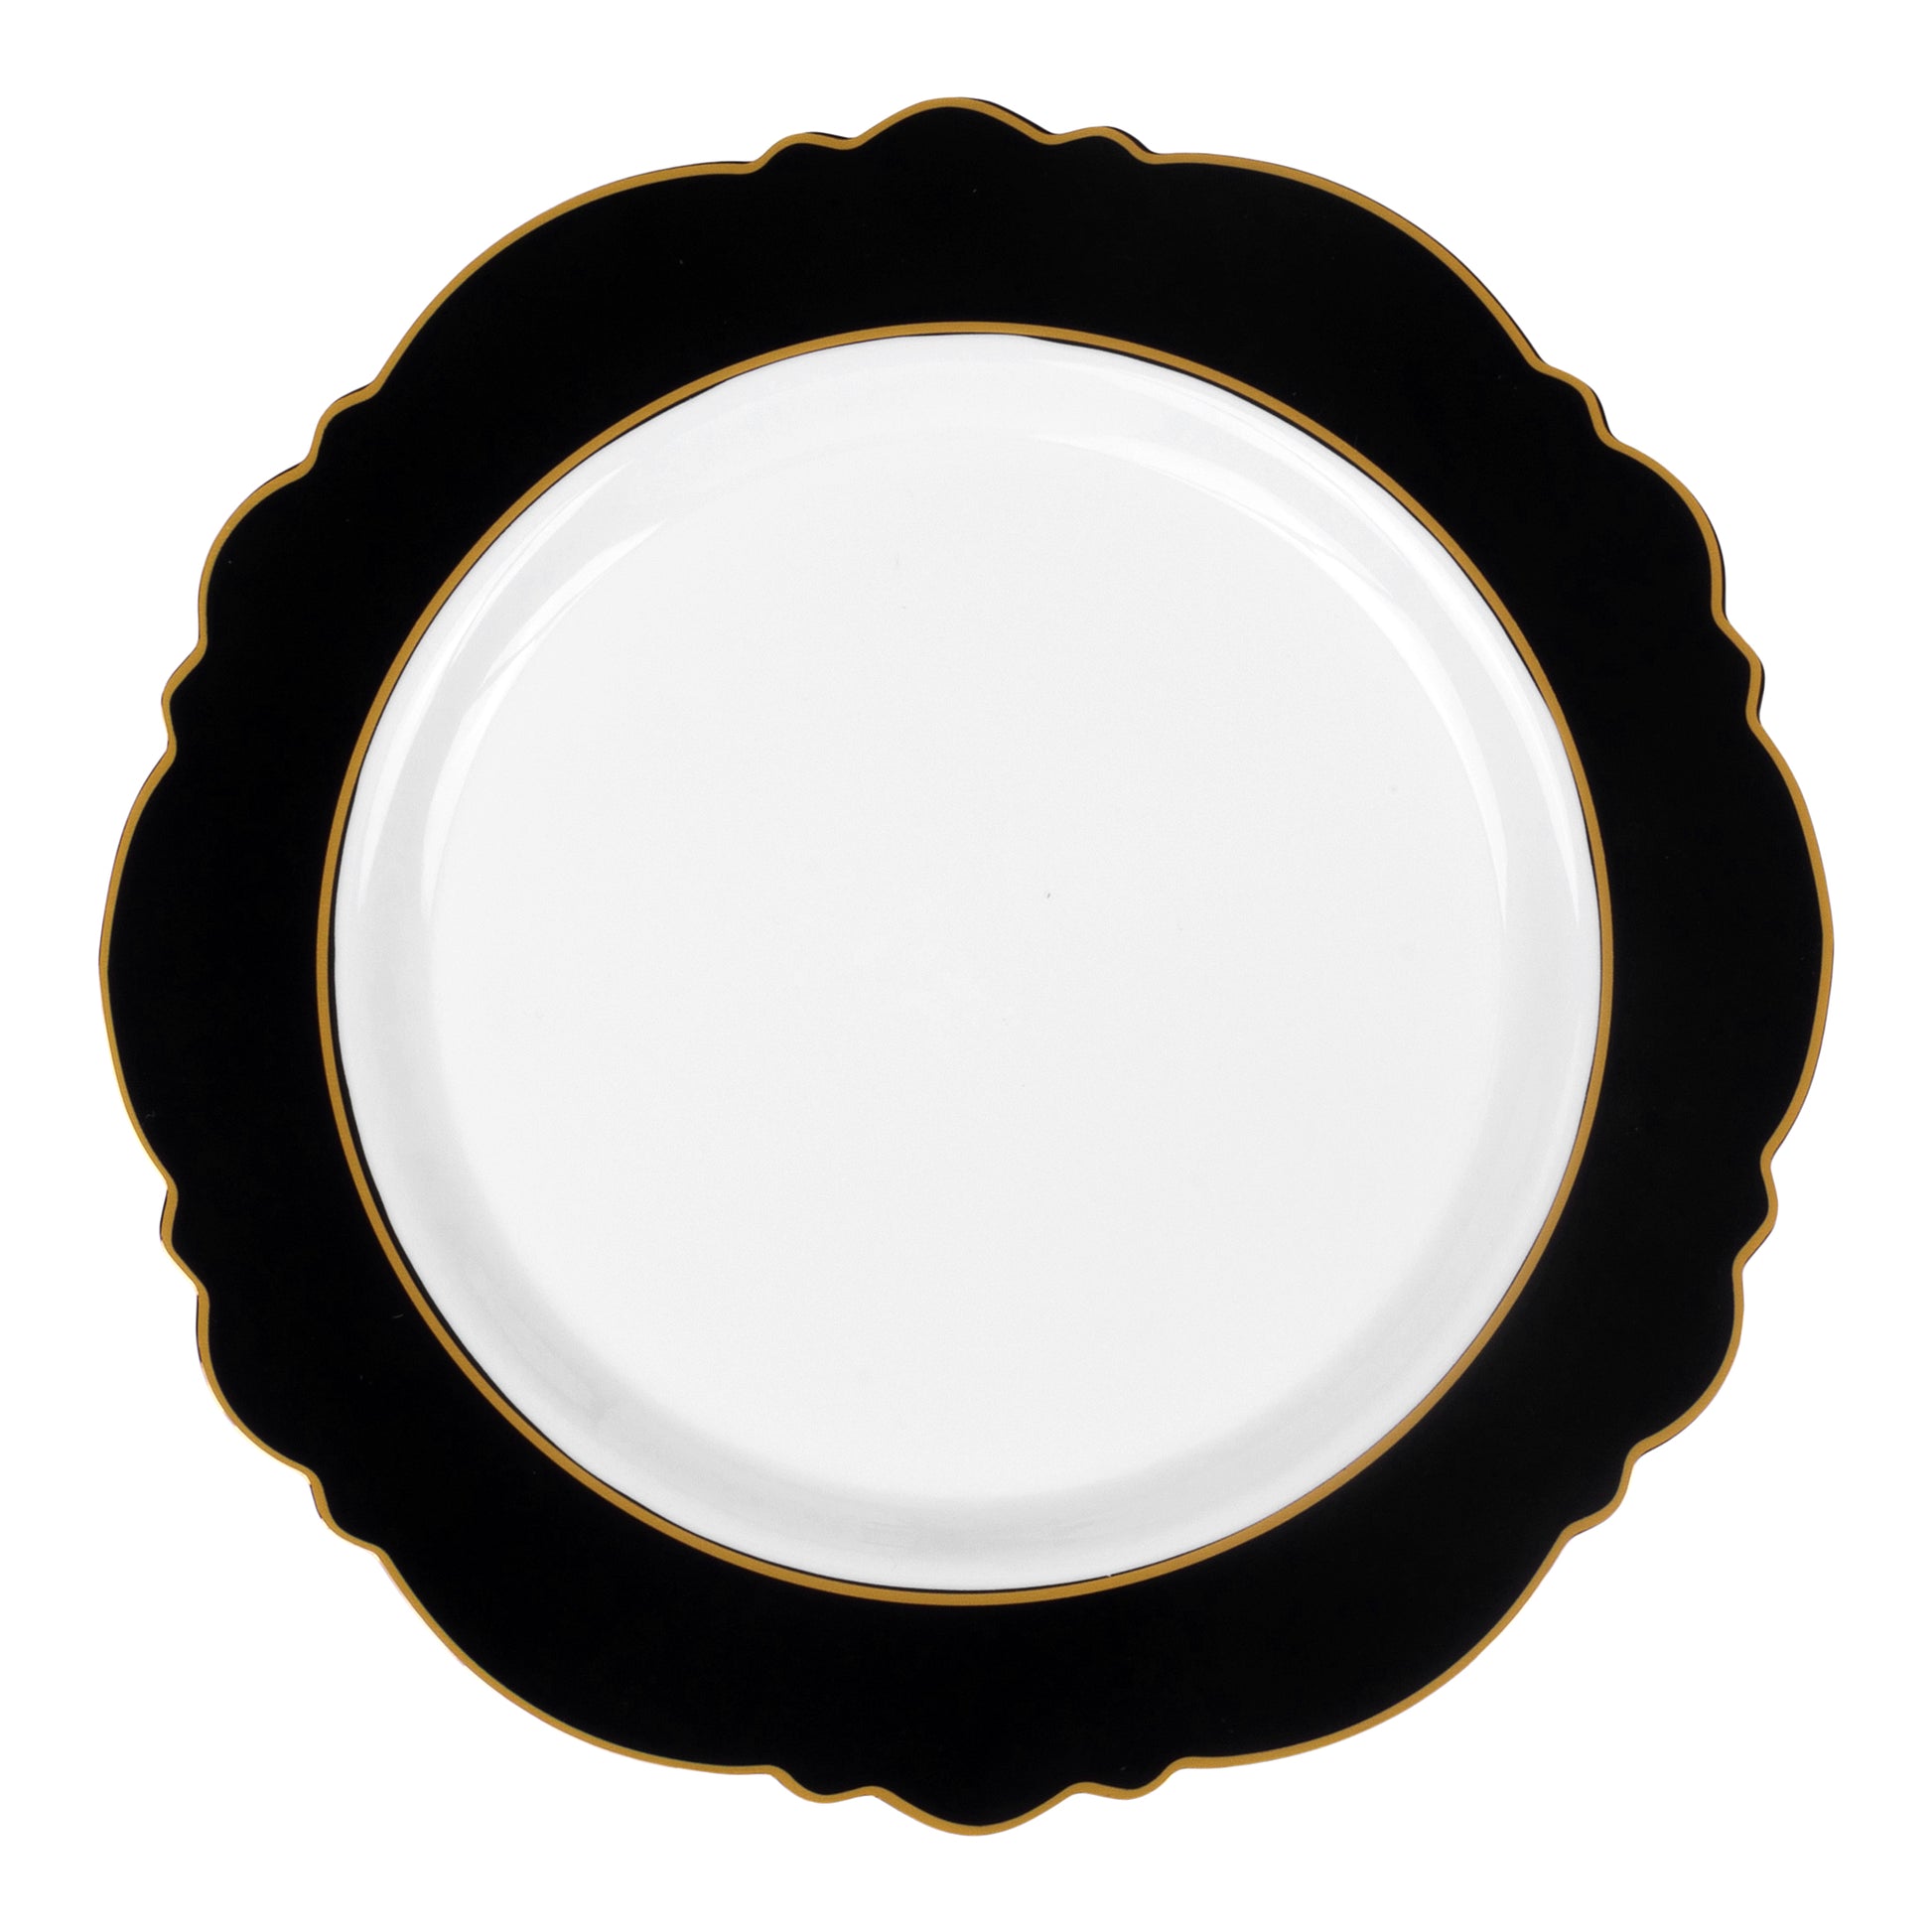  Elegant Plastic Plates for Party with Scalloped Rim